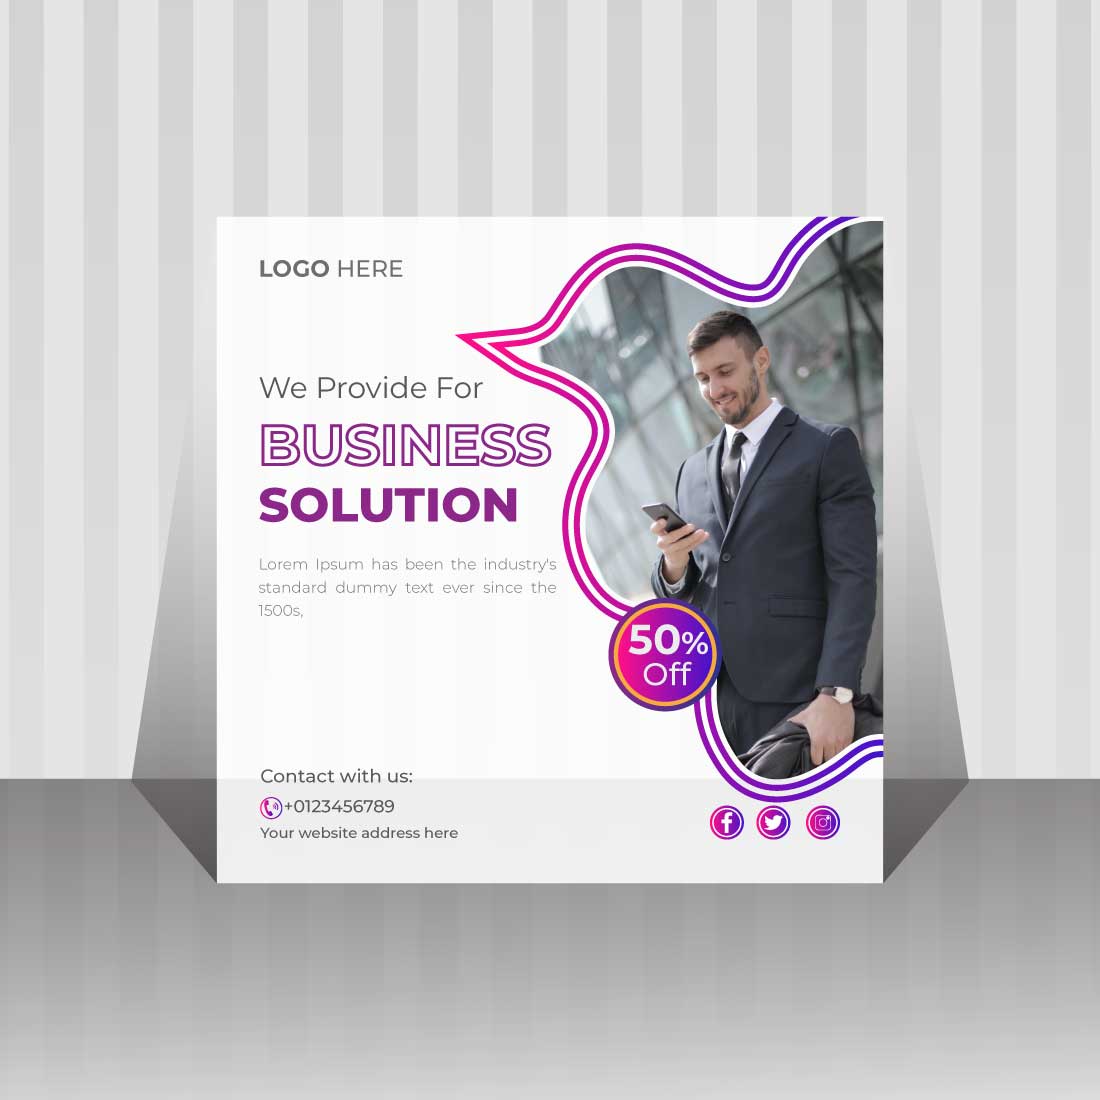 Corporate business social media post design template cover image.